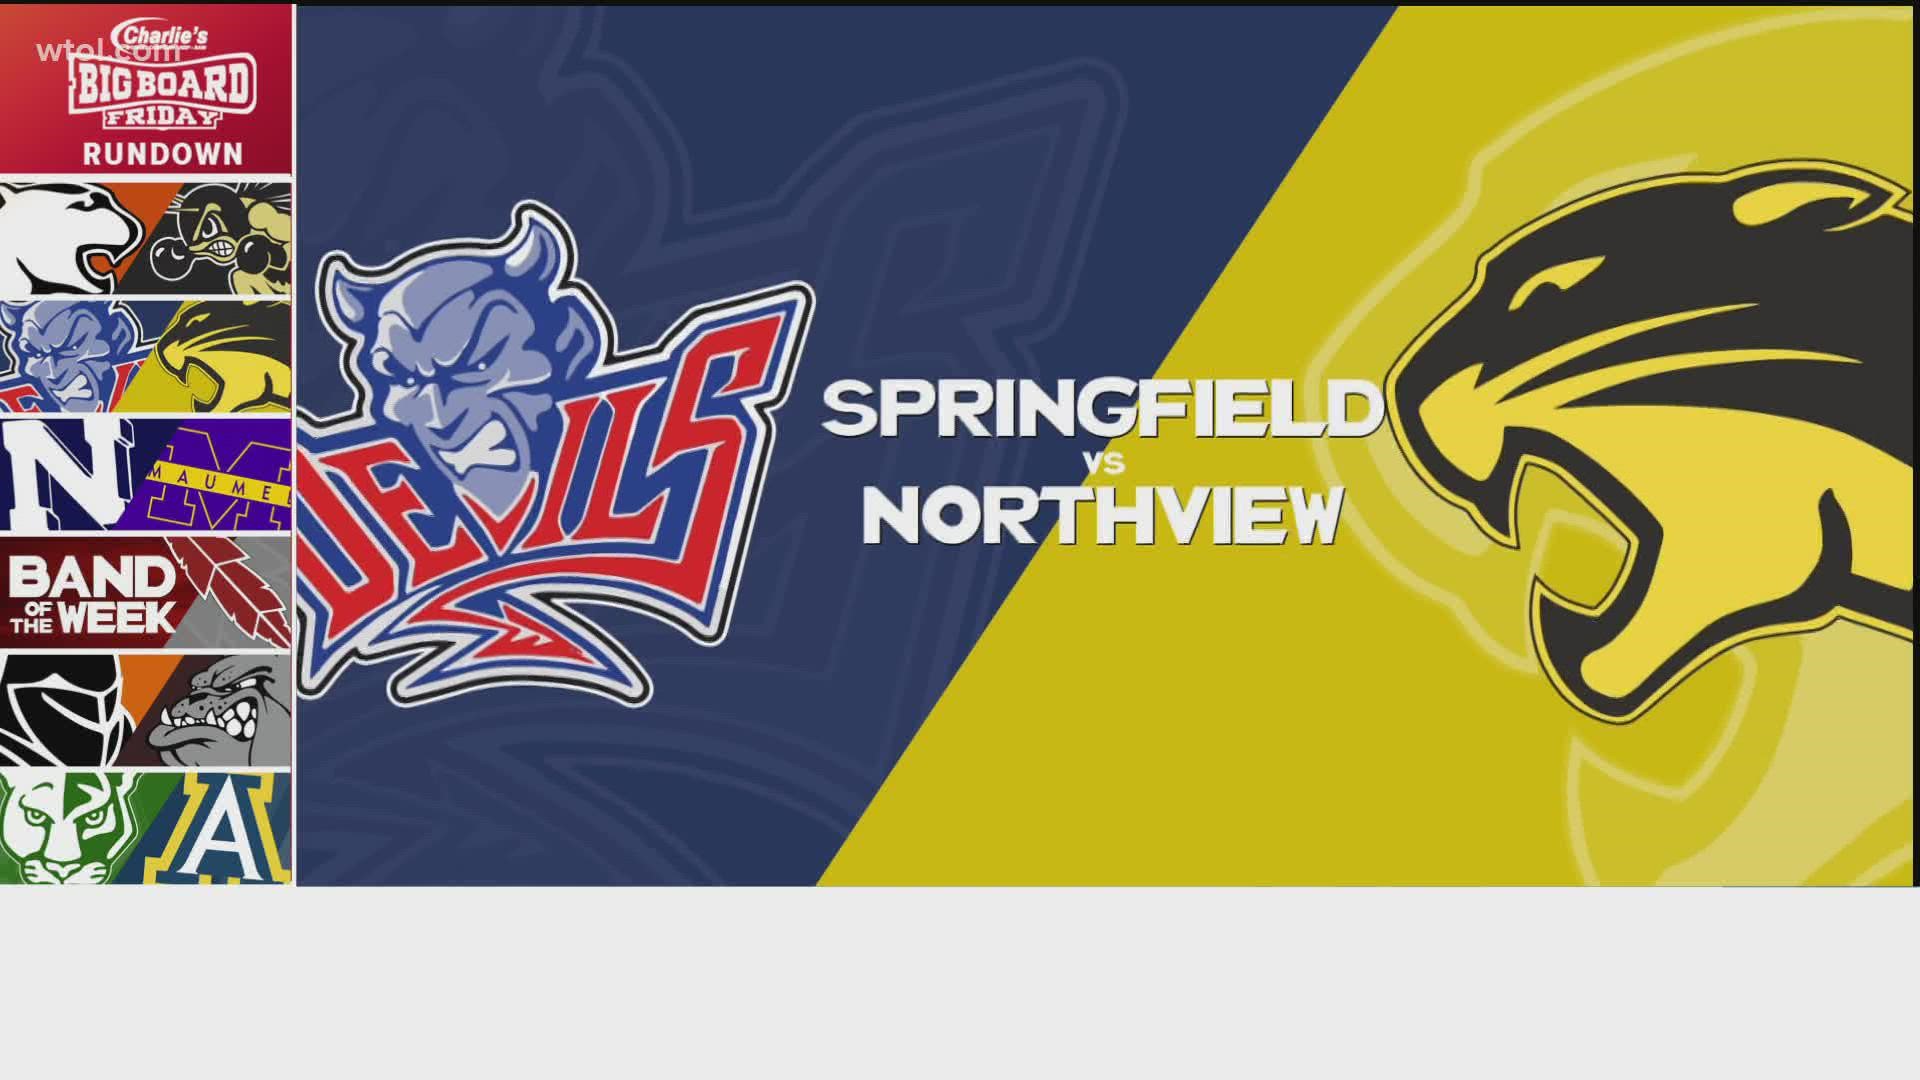 Northview stays unbeaten in league play with a win against Springfield.